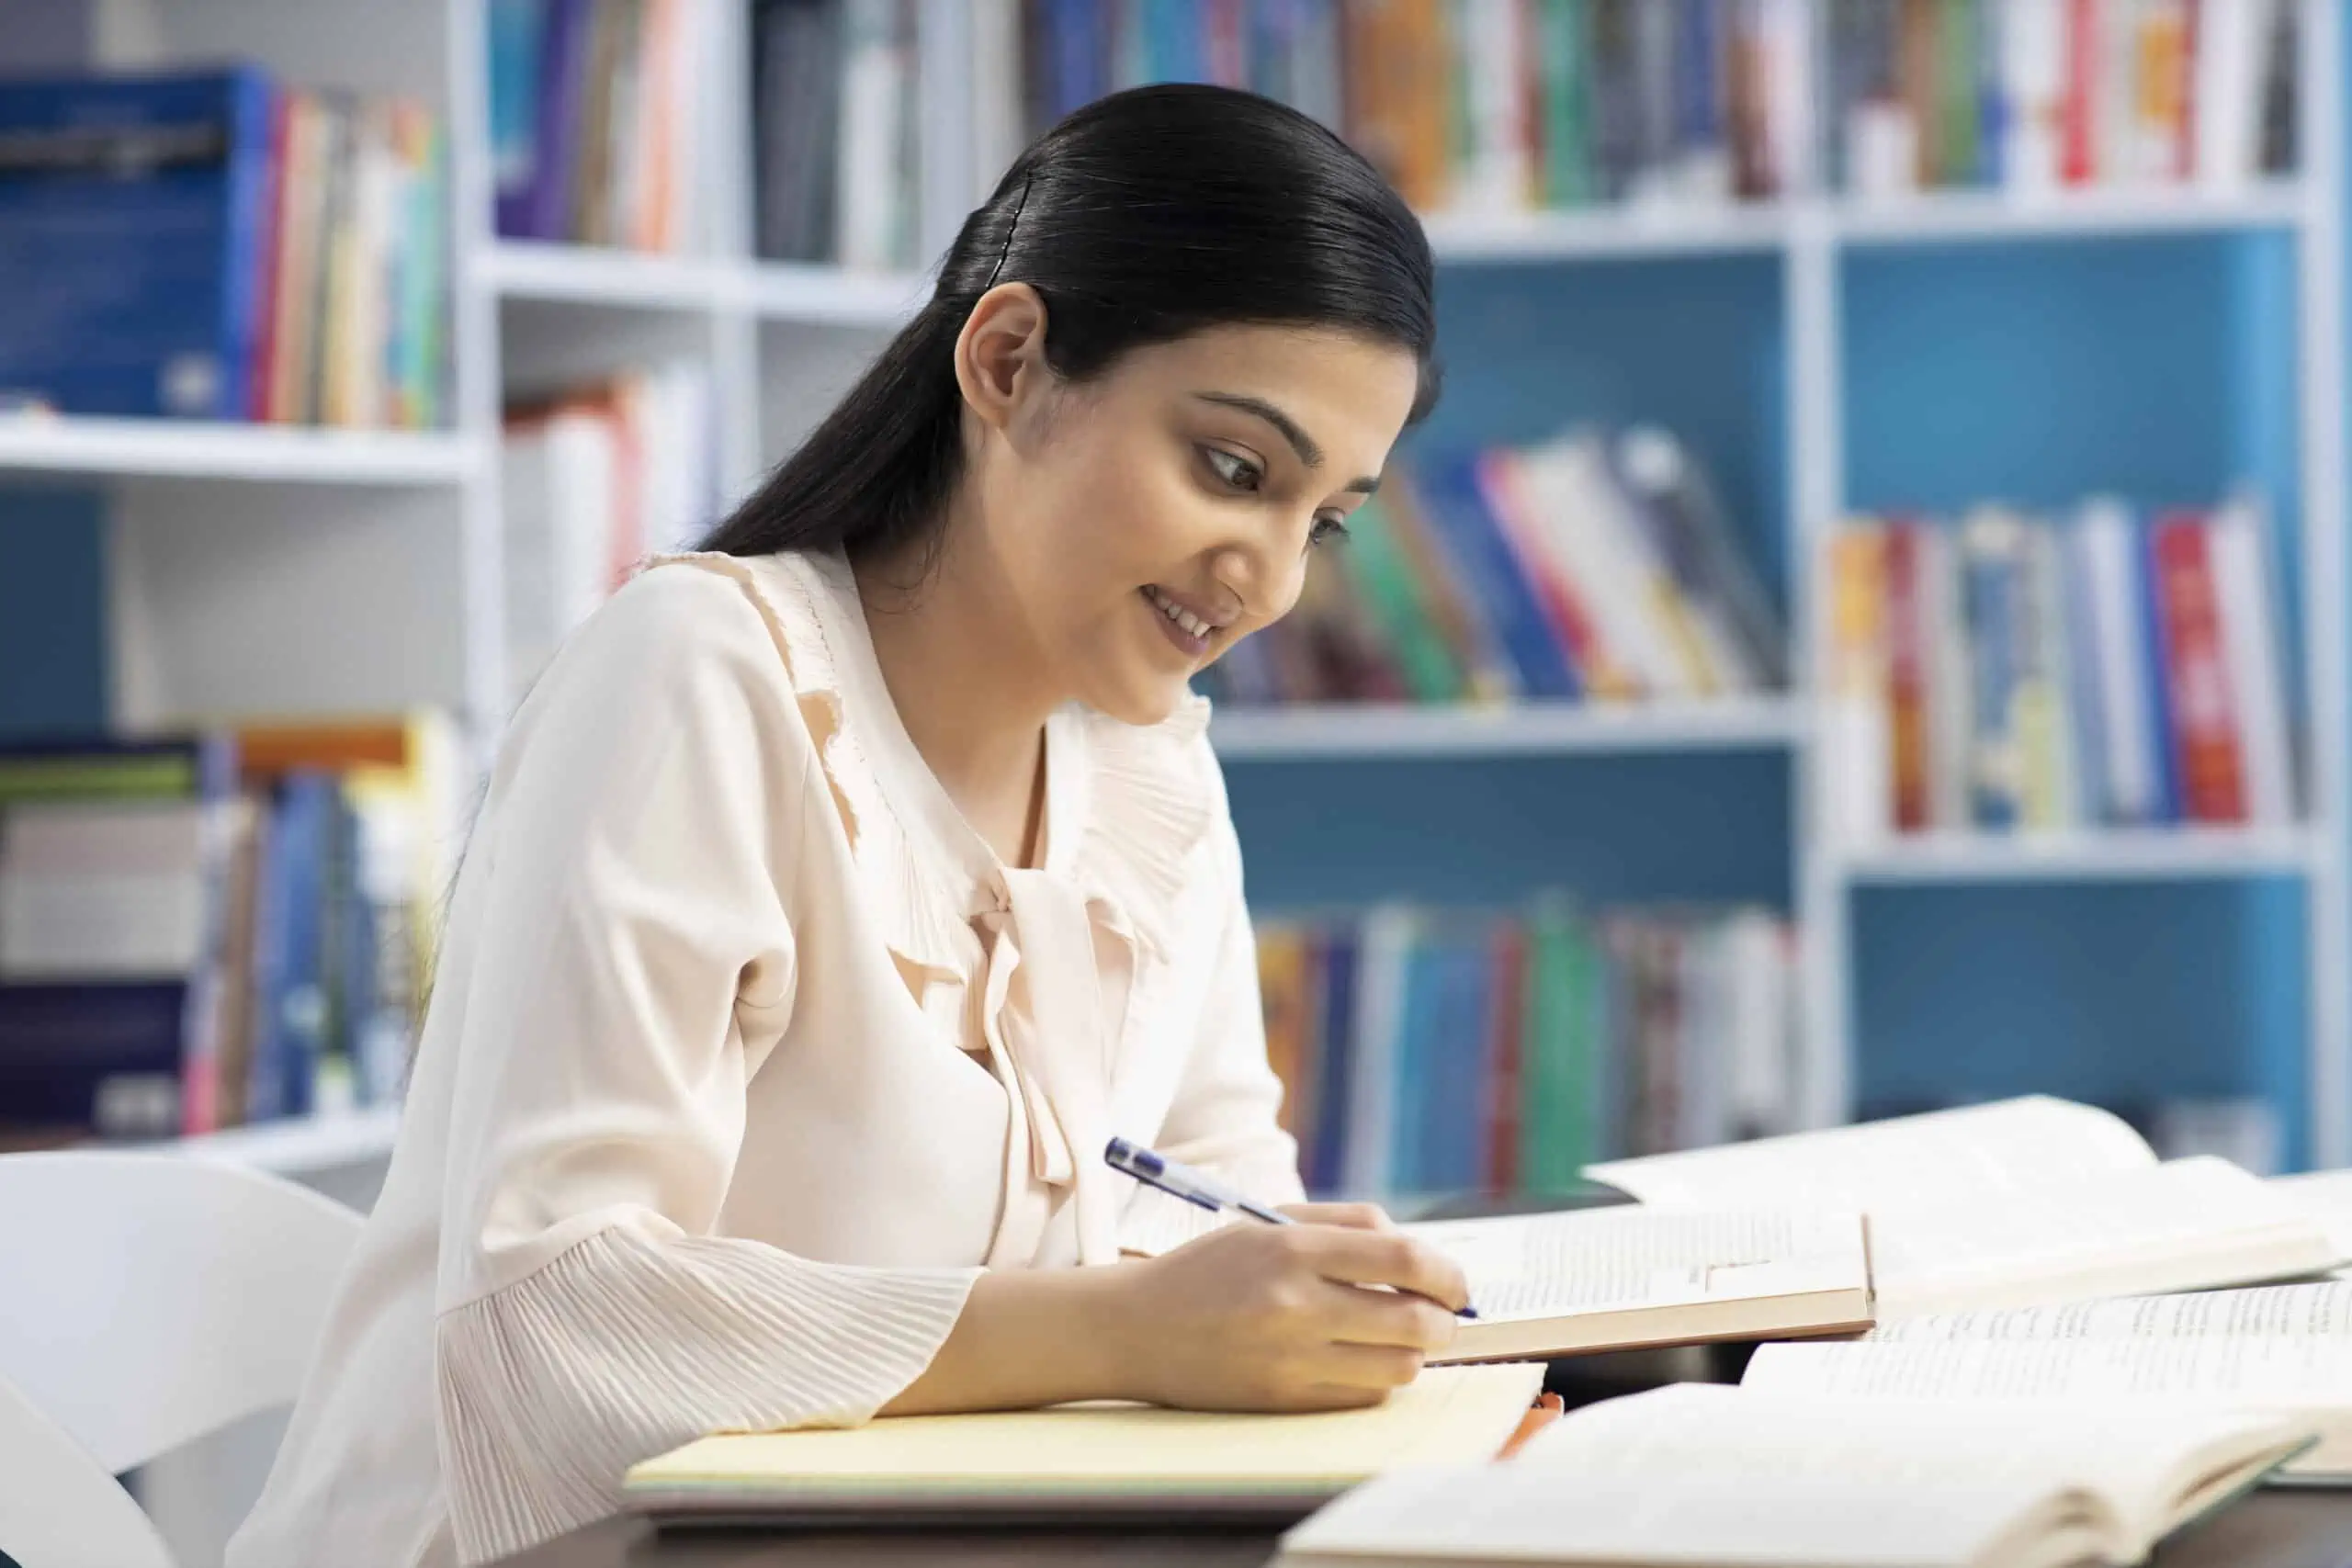 An Indian woman studies in a library.